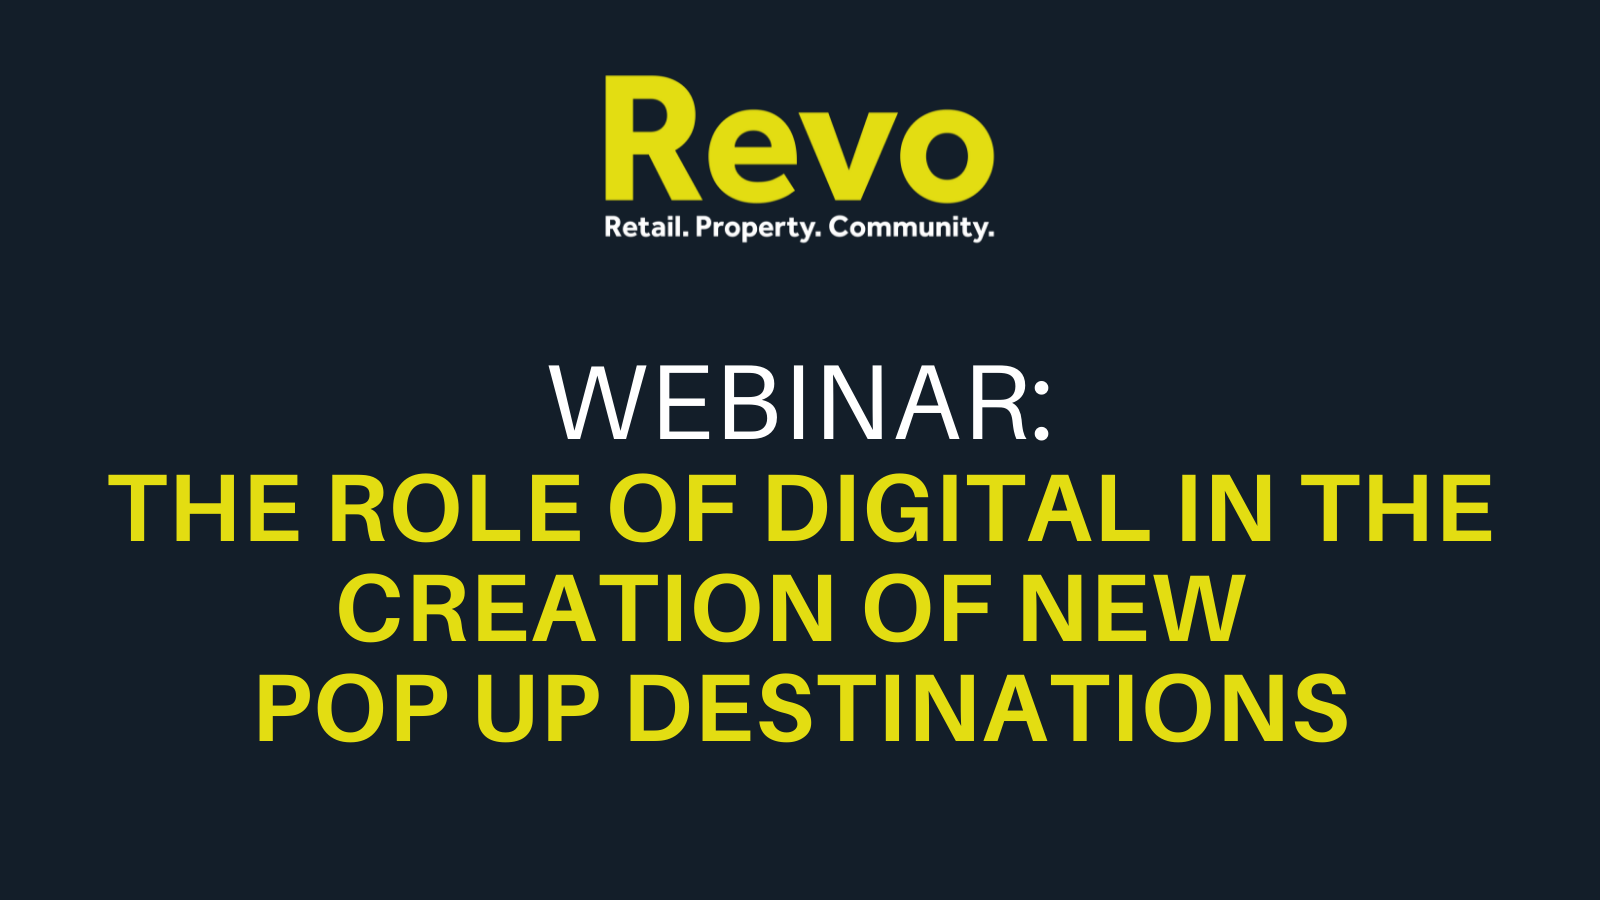 The role of digital in the creation of new Pop Up destinations